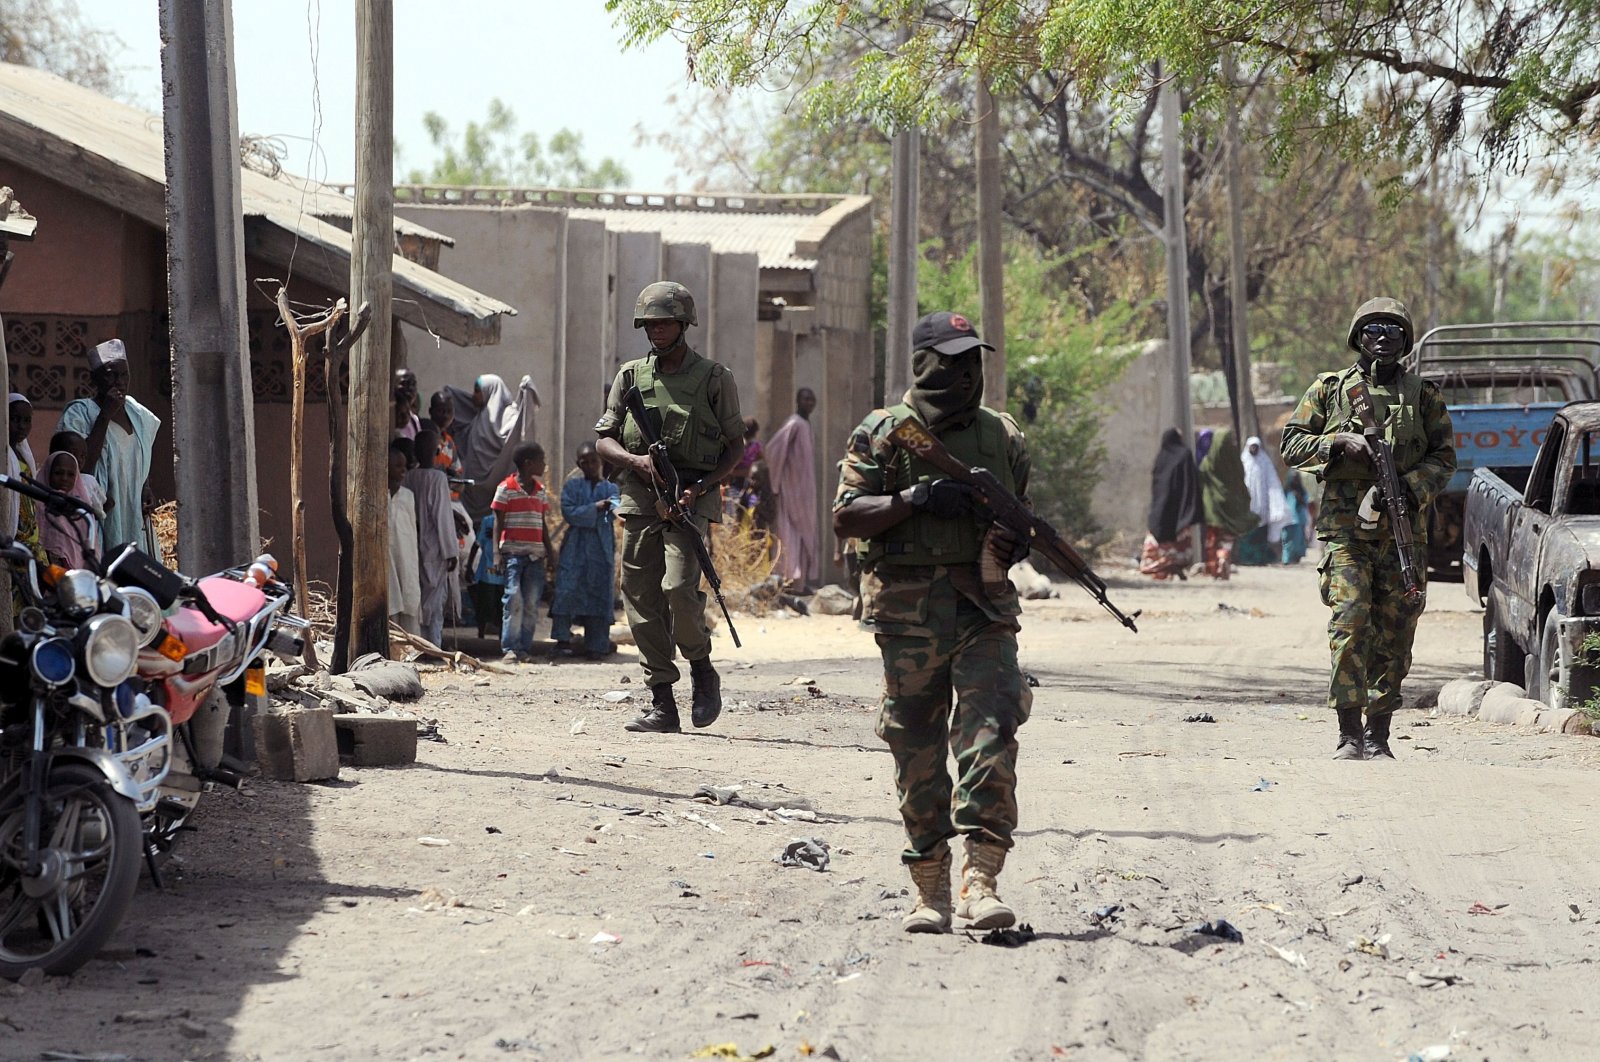 This file photo shows Nigerian troops patrolling the streets of the remote northeastern town of Baga, Borno State, Nigeria, April 30, 2013. (AFP Photo)